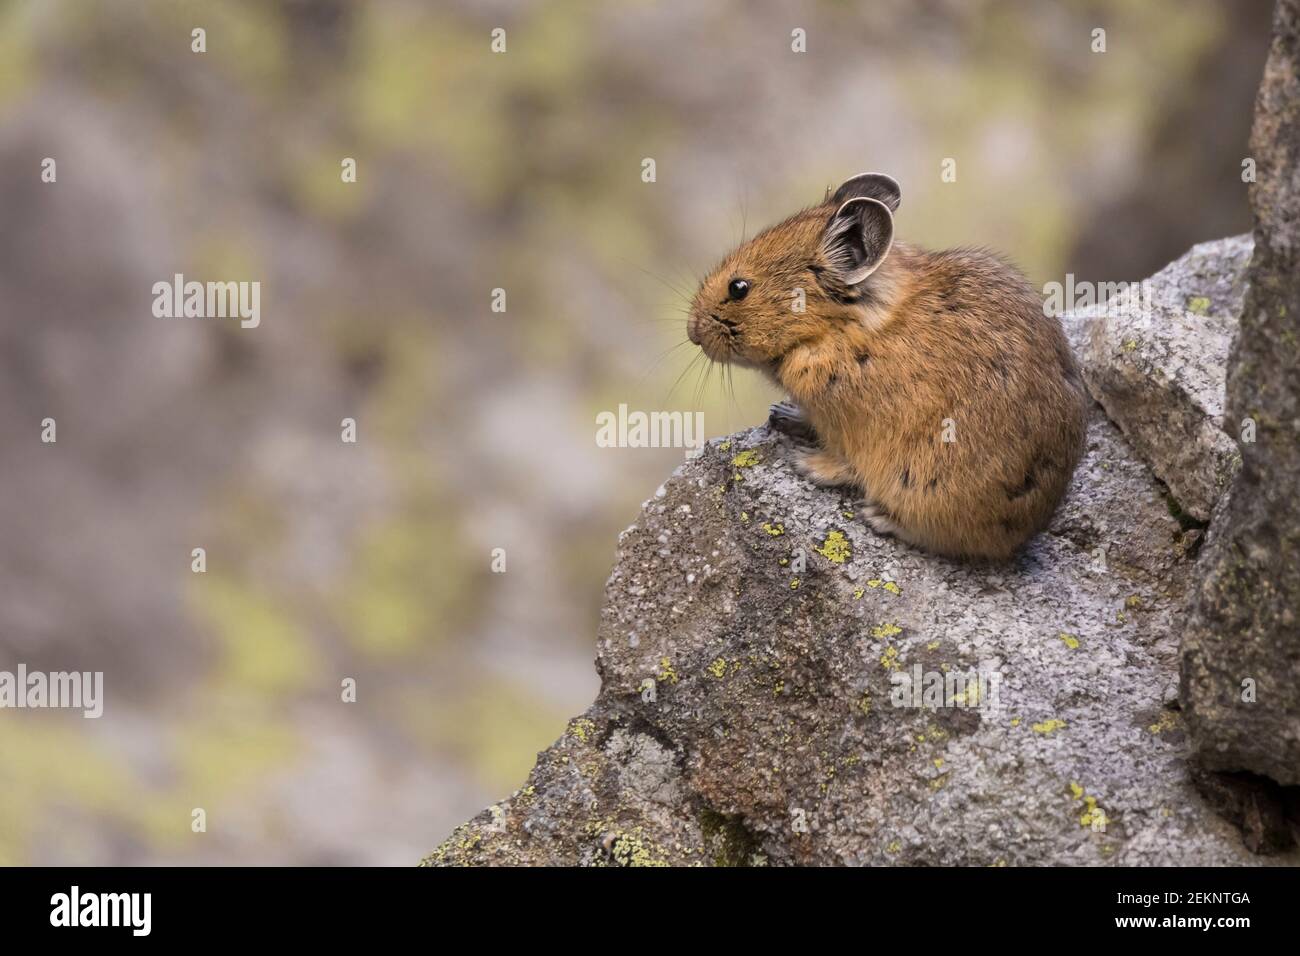 Cute American Pika (Ochotona princeps) with brown fur staying still on some rocks in the Canadian Rockies Stock Photo